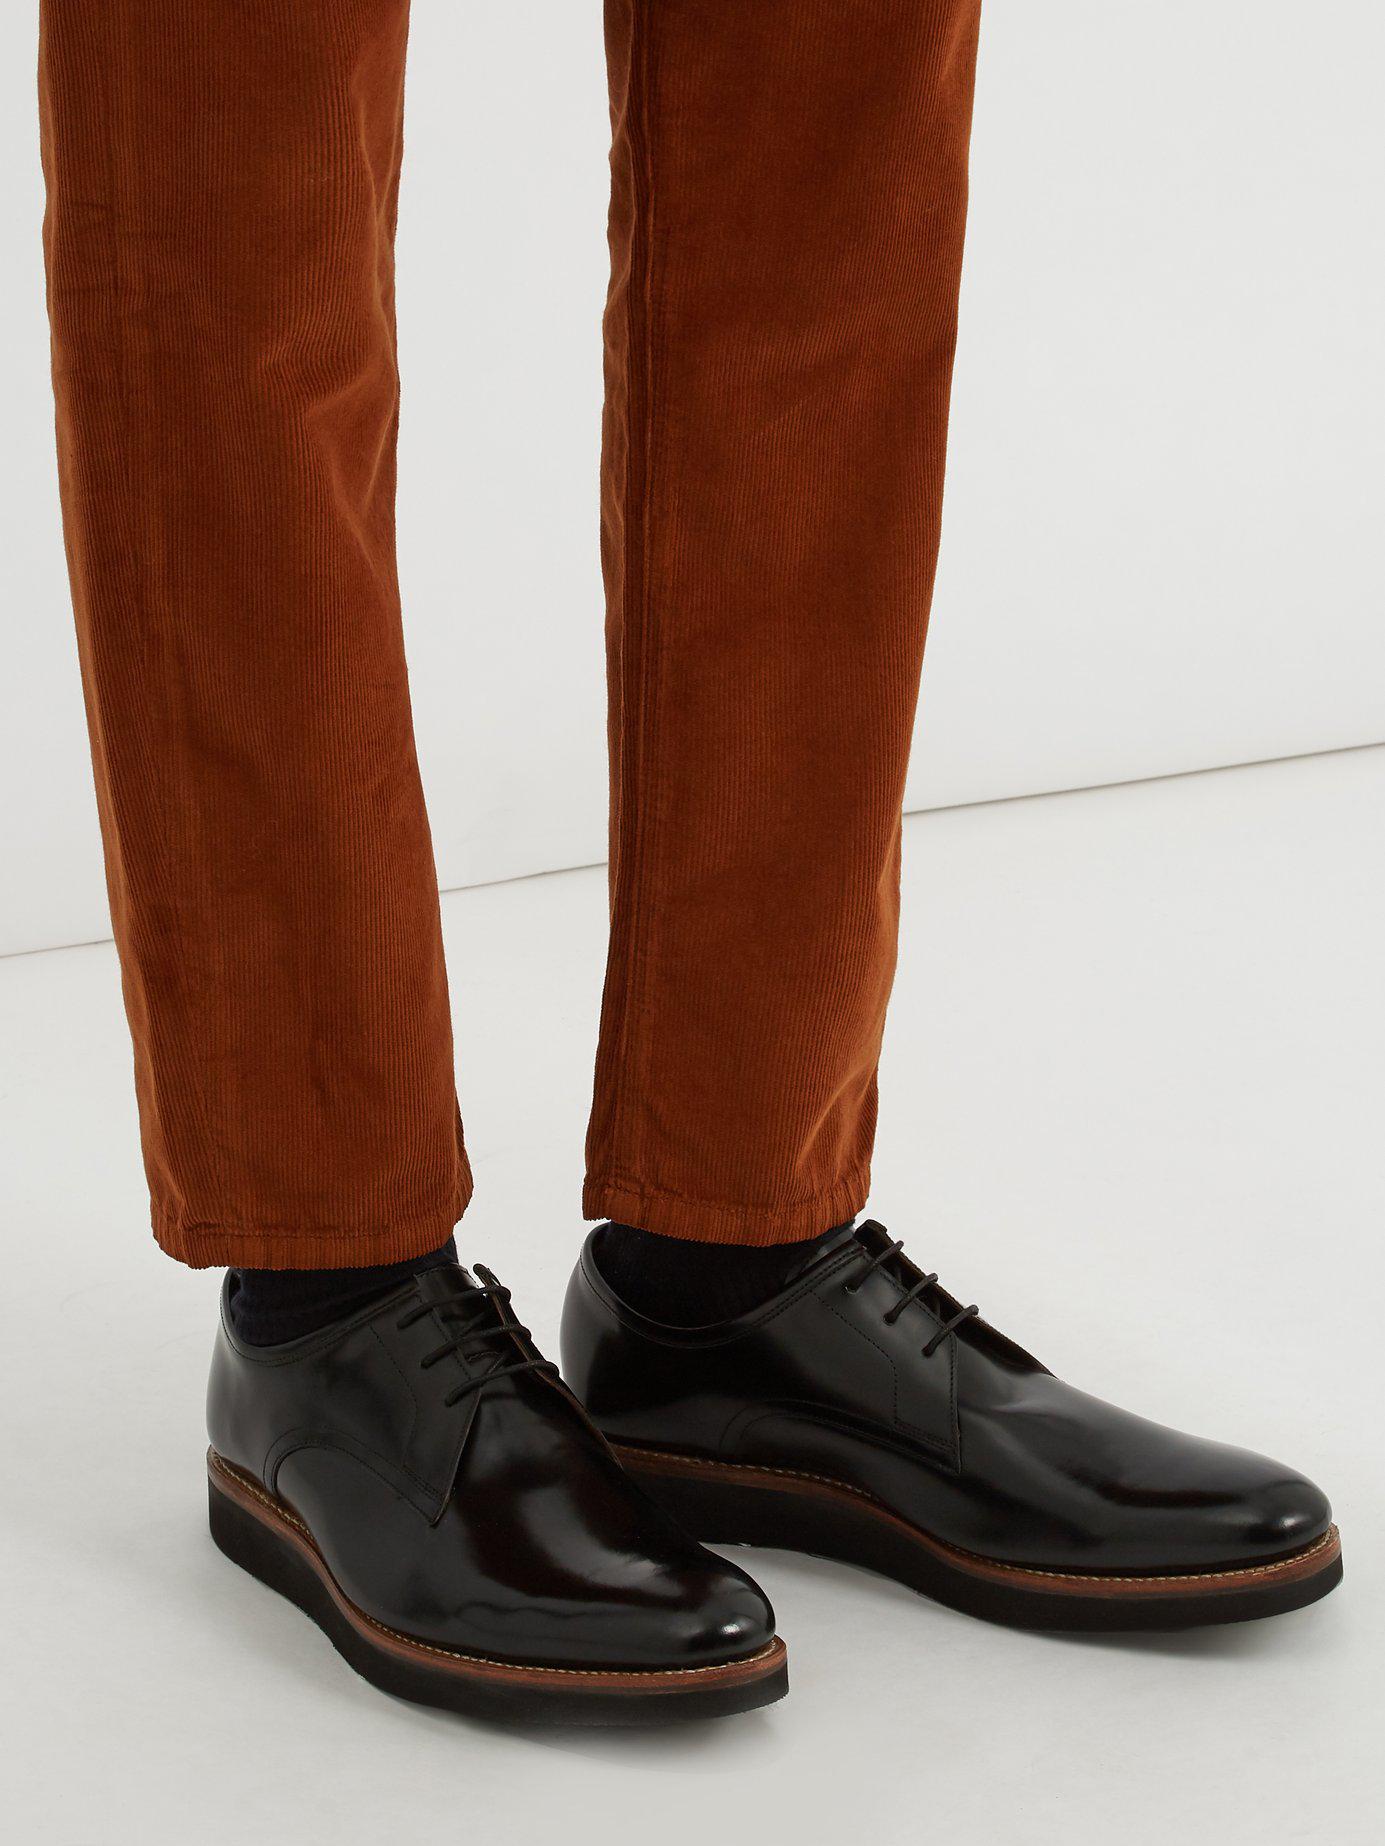 Grenson Lennie Leather Derby Shoes in 